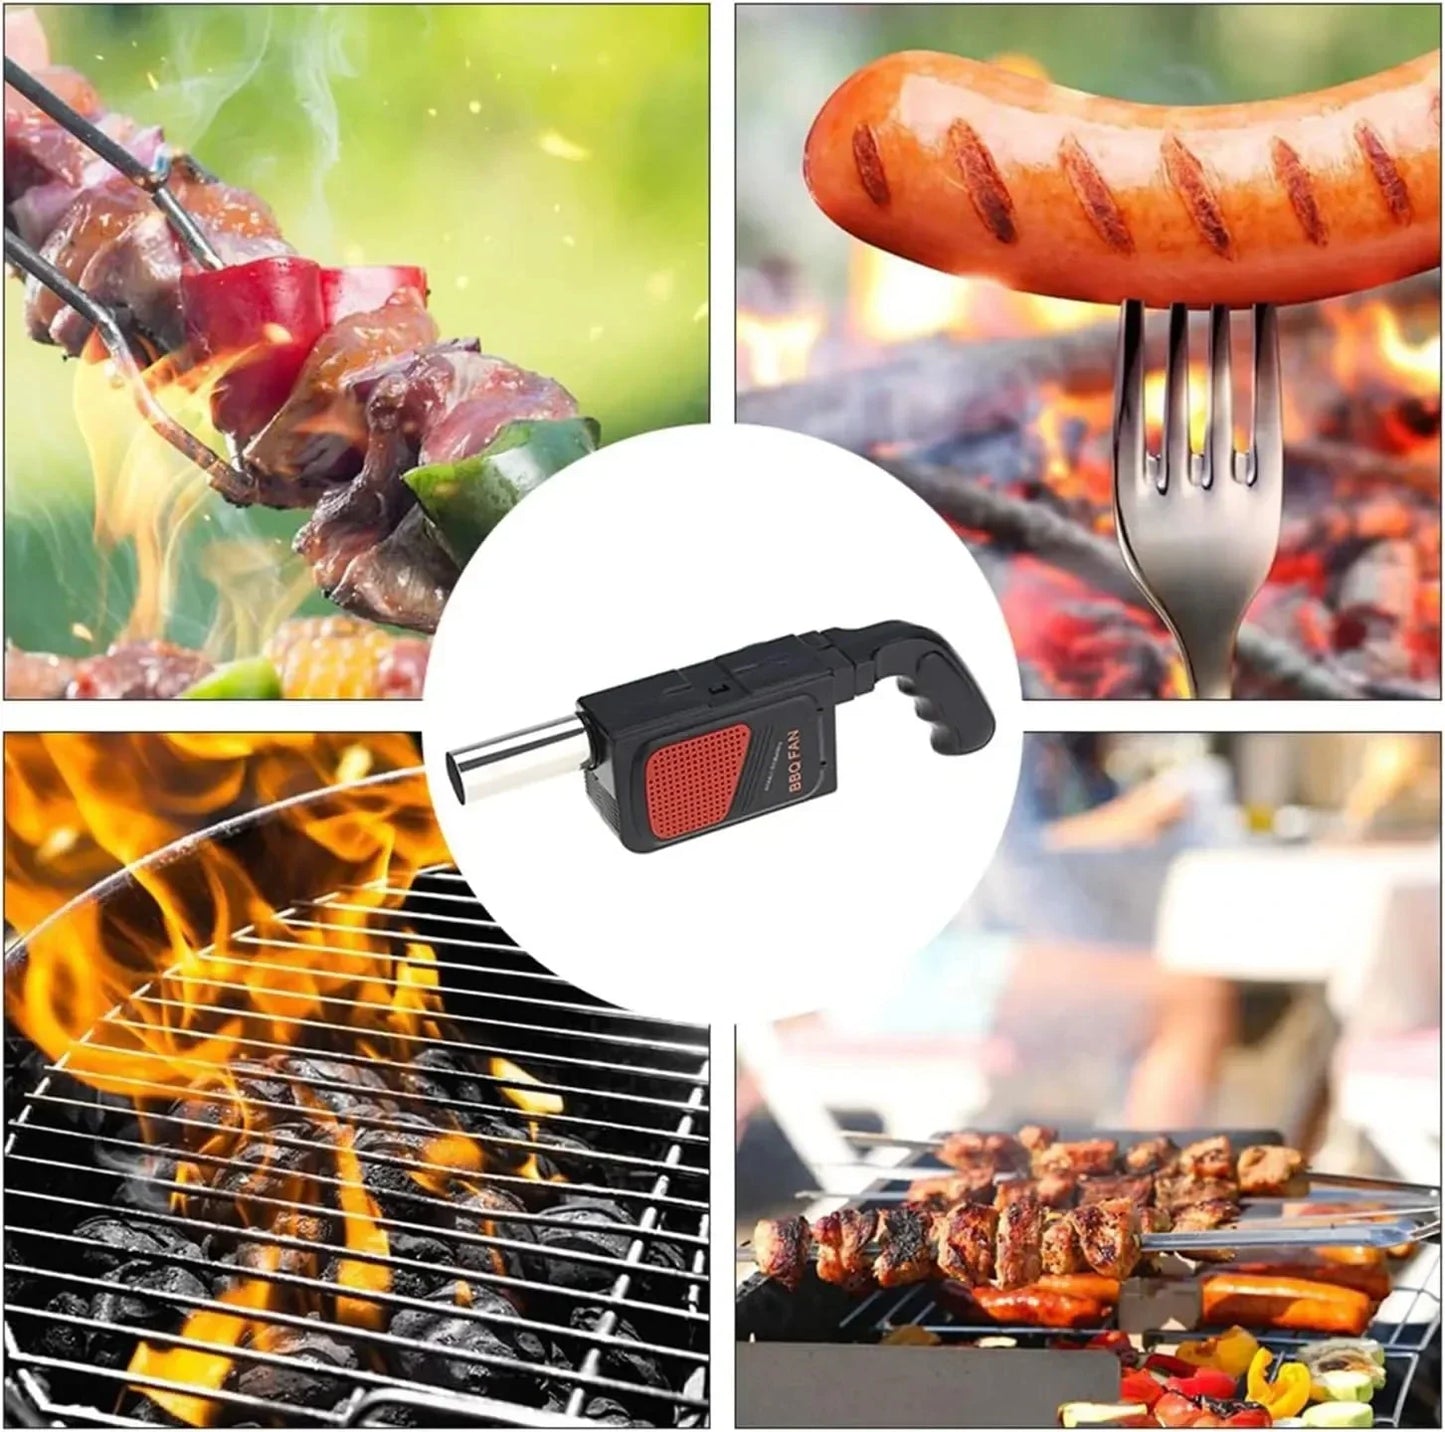 Outdoor Camping BBQ Air Blower Portable Handheld Electric Fan Picnic Cooking Lighter Tool Handheld Barbecue Charcoal Grill Fan